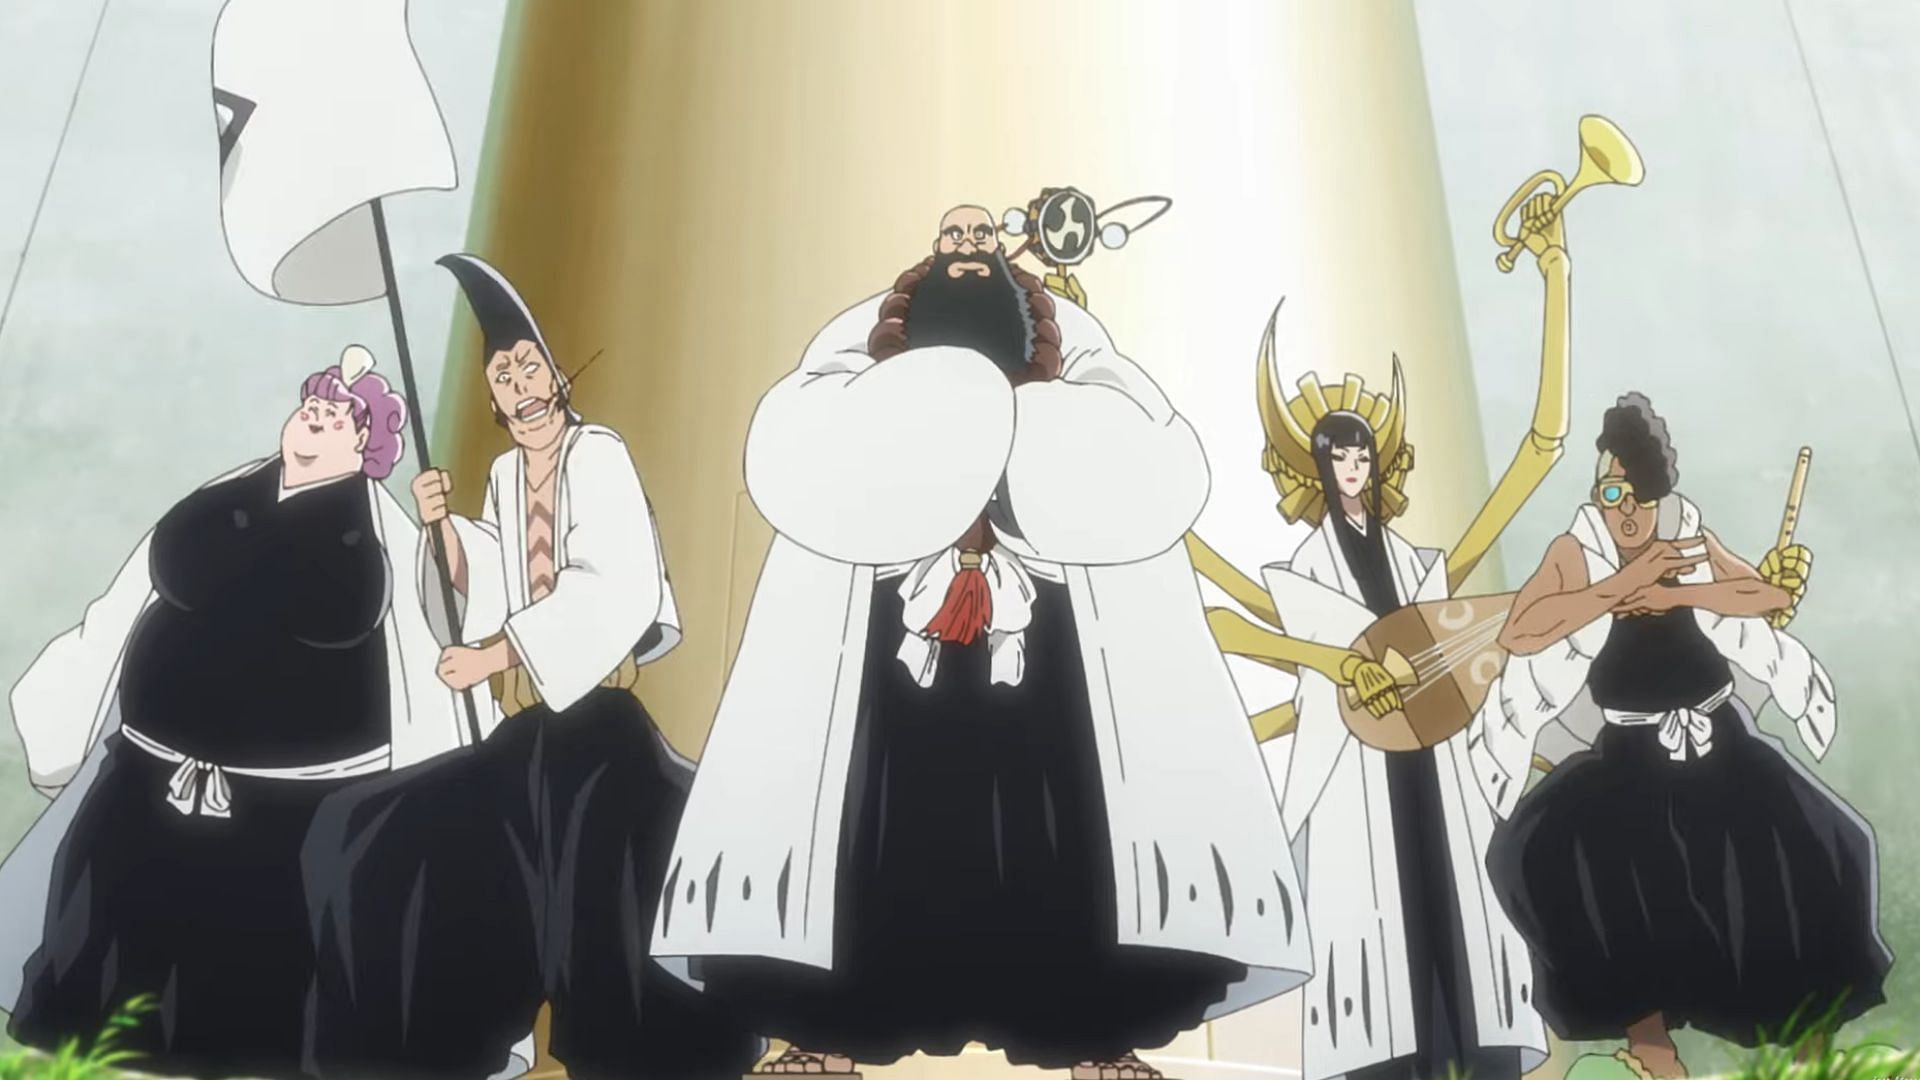 Bleach TYBW episode 24 preview hints at Yhwach encountering the Soul King's  Royal Guard